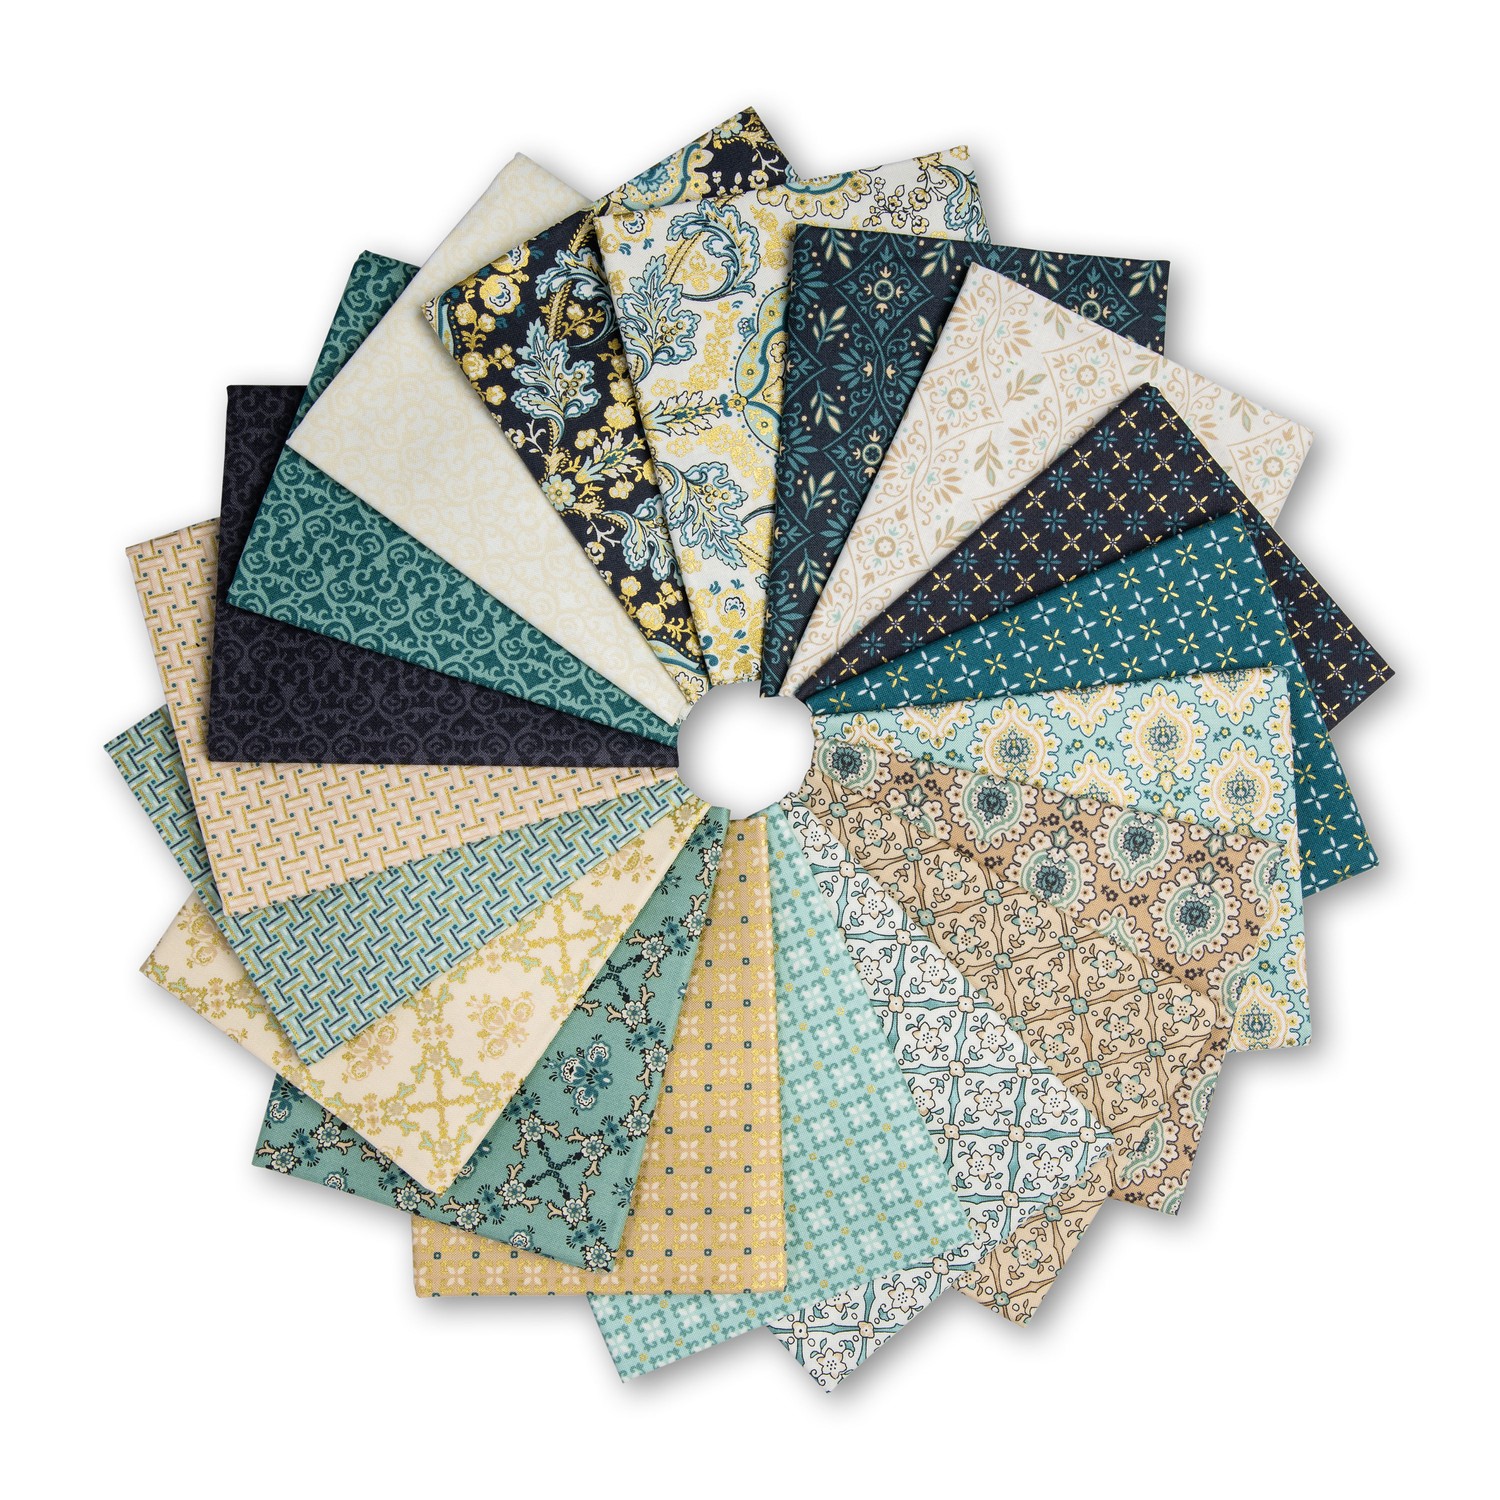 Parlor Room Fat Quarter Sampler by Connecting Threads